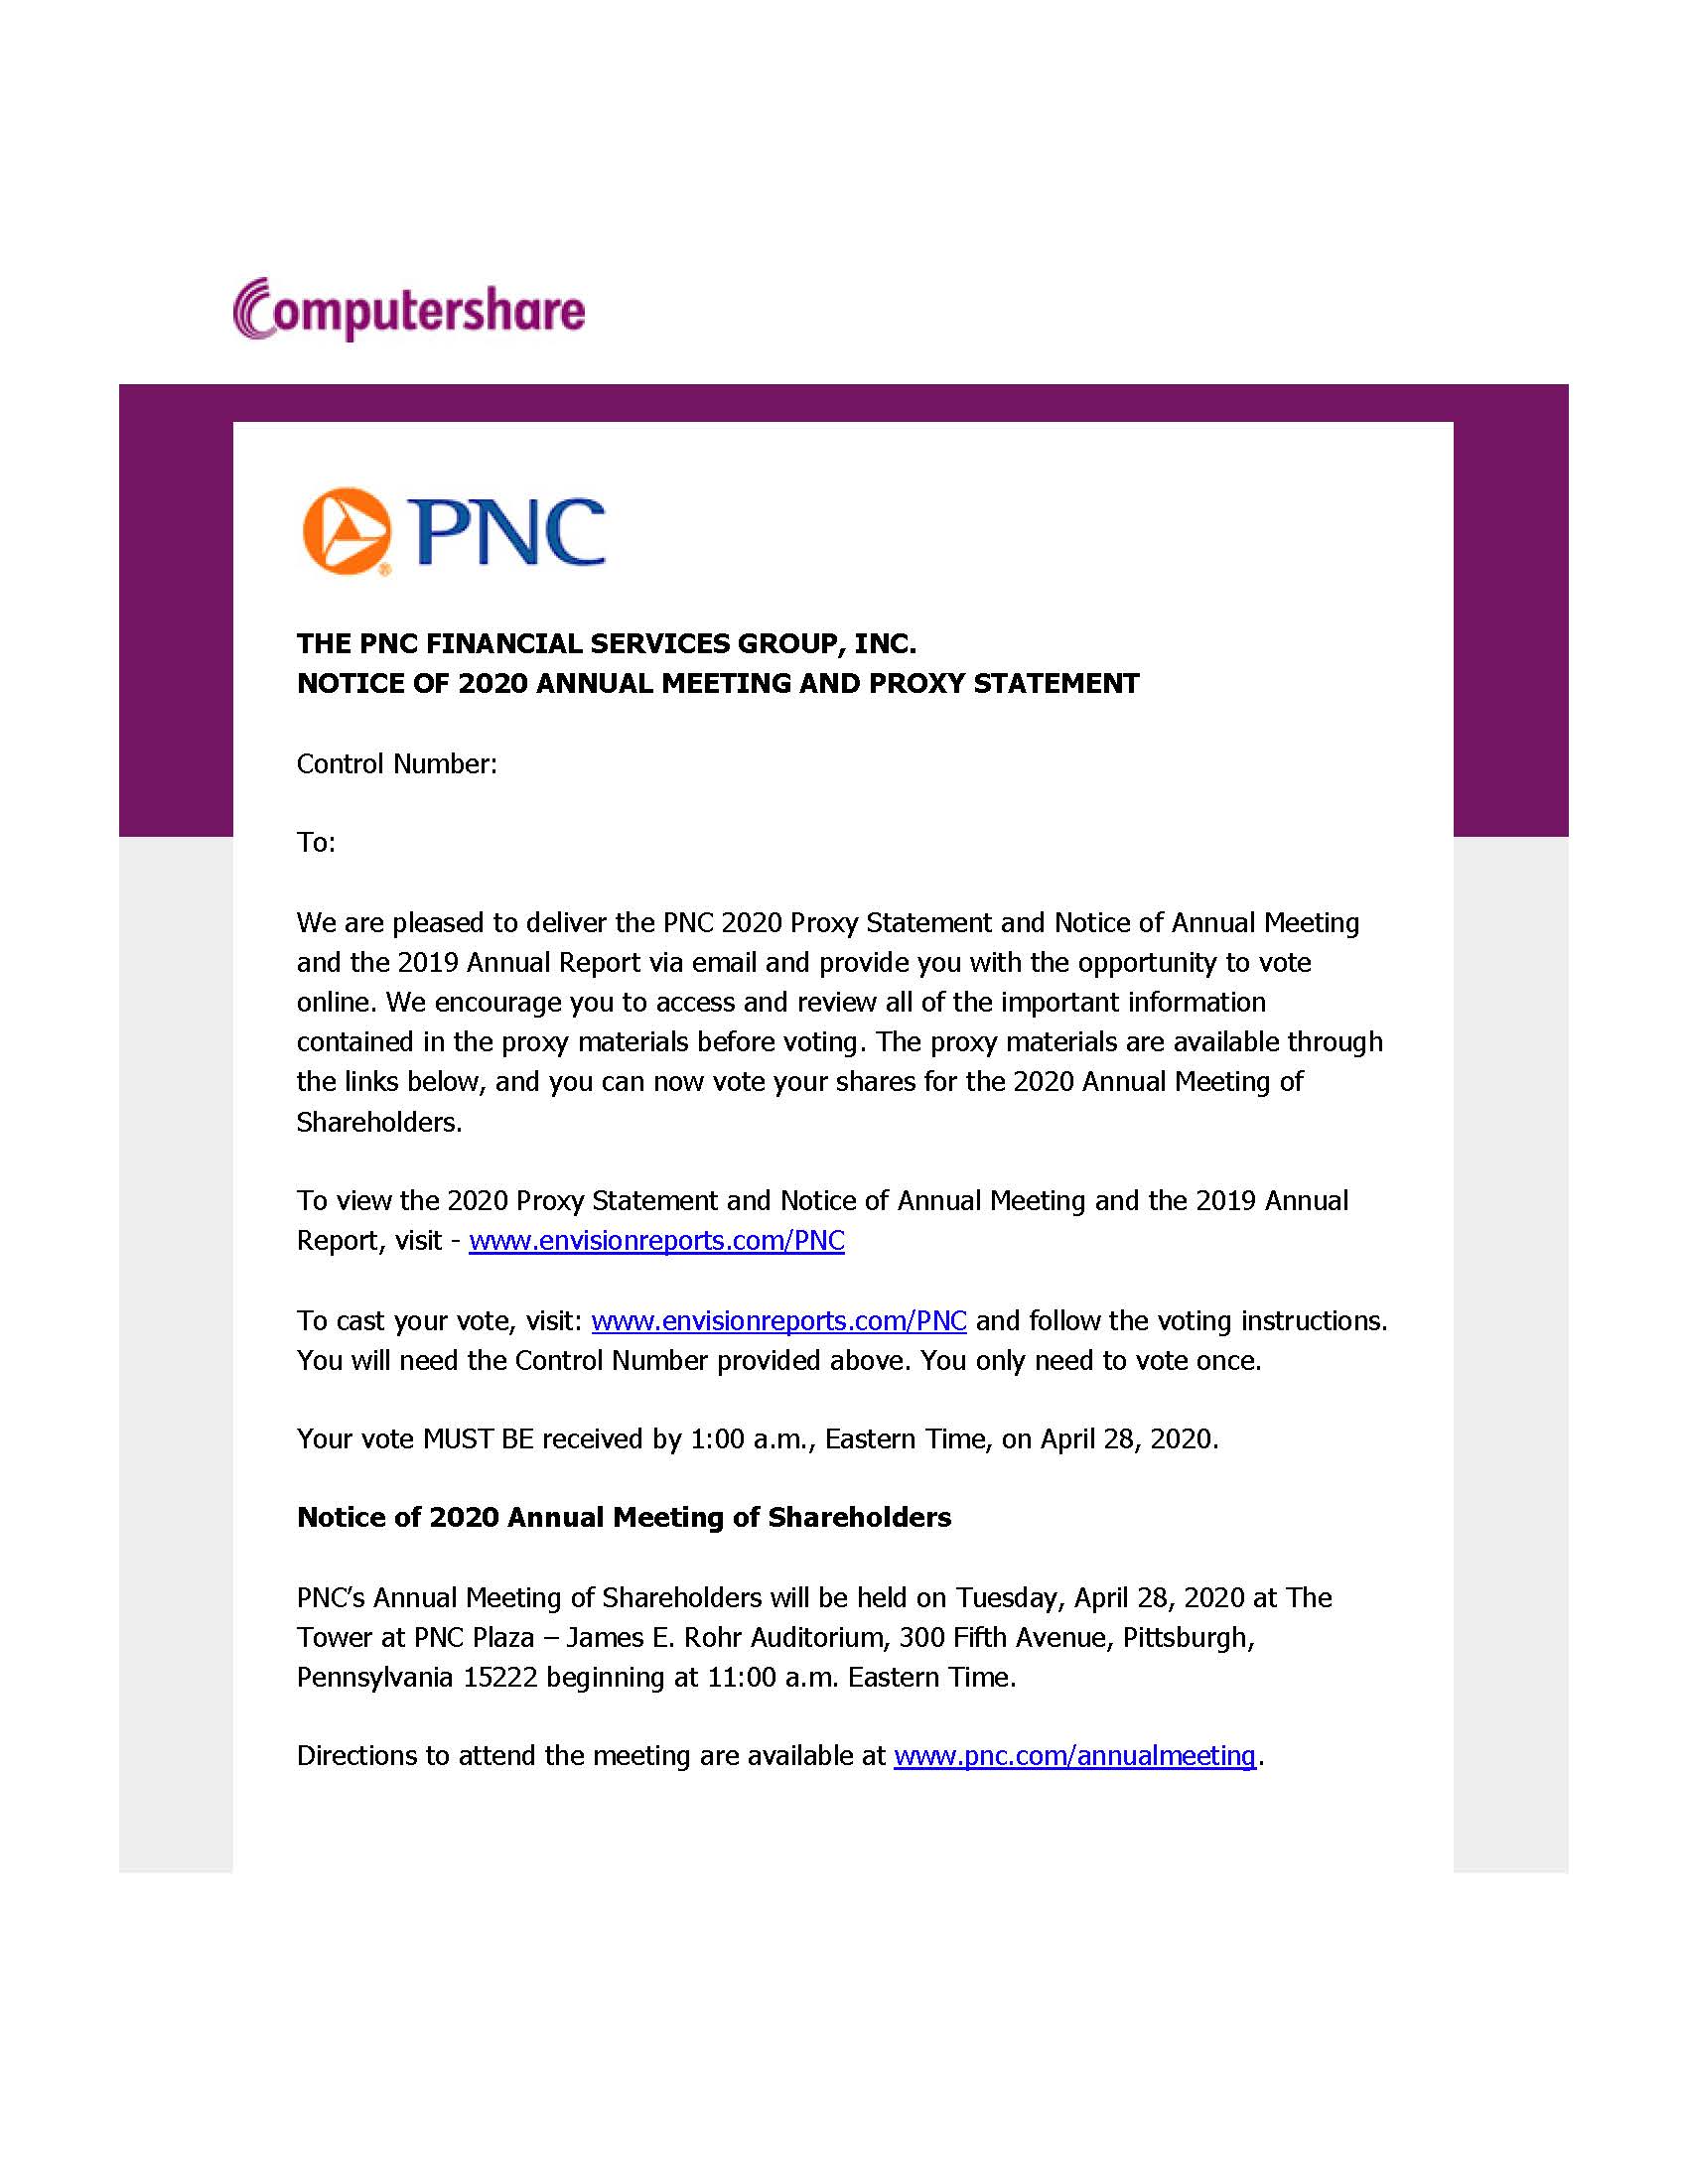 pnc2020emailpage1.jpg